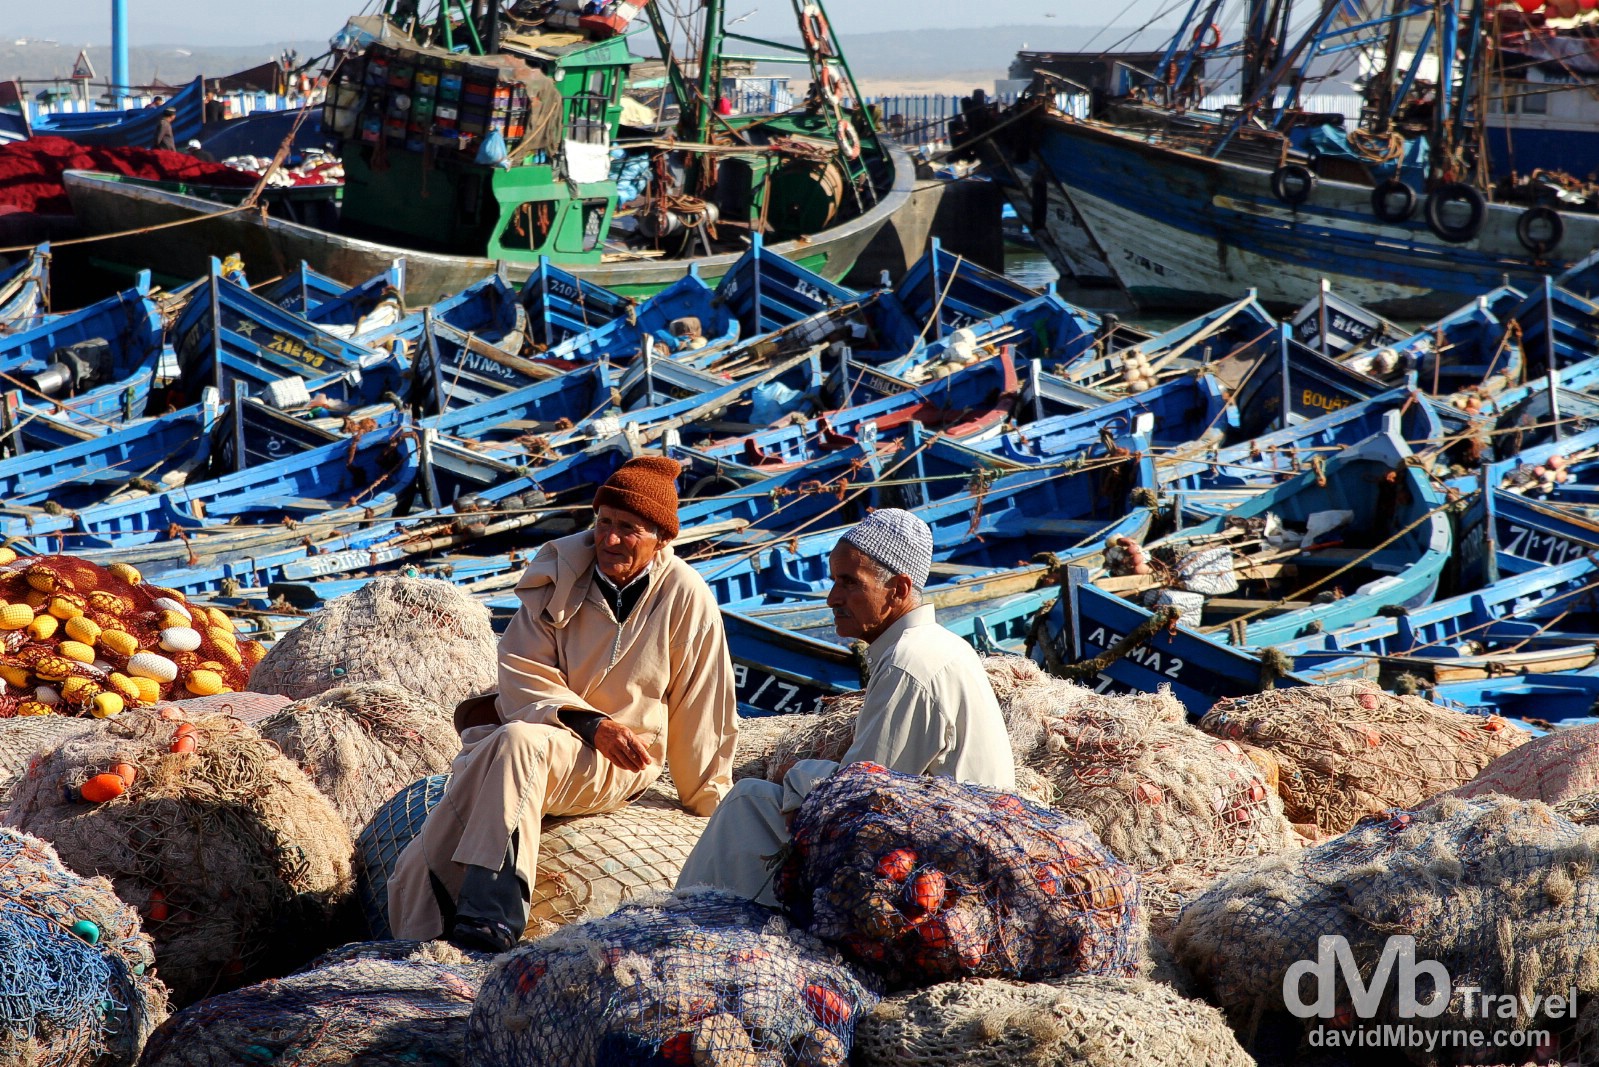 Locals sit on the nets in the port in Essaouira, Morocco. May 3rd, 2014.